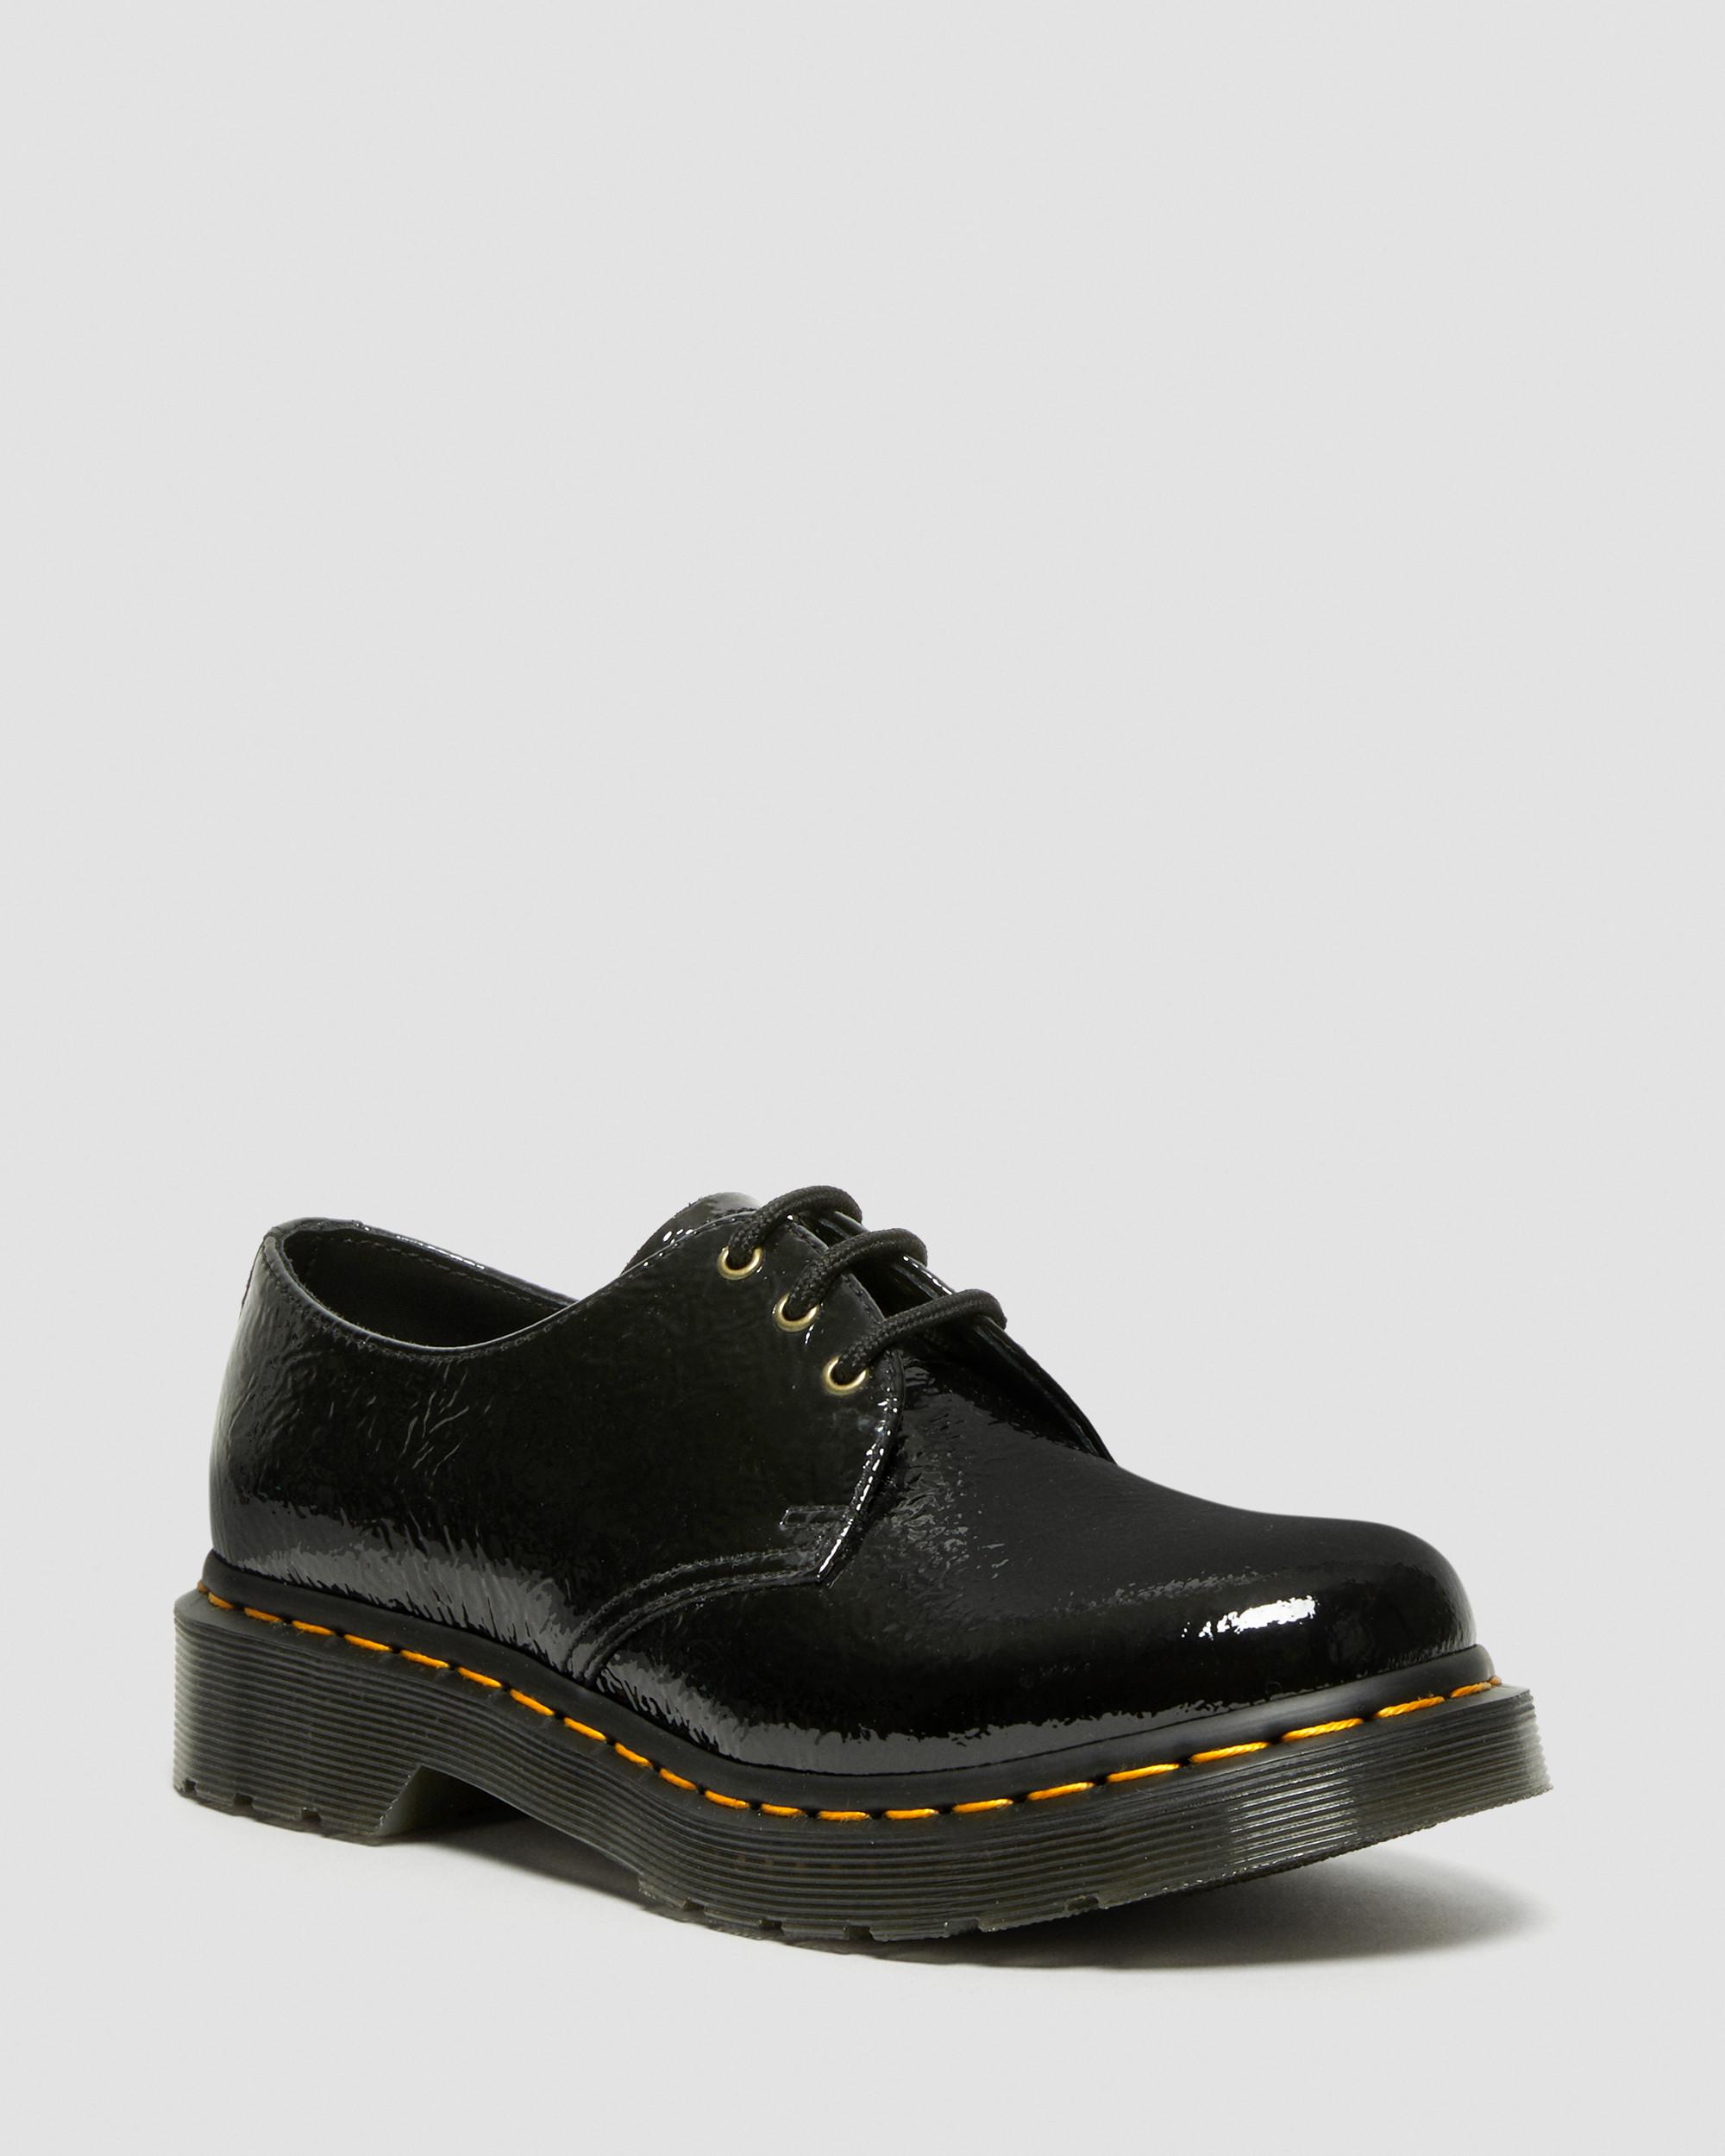 1461 Women's Distressed Patent Oxford Shoes in Black | Dr. Martens